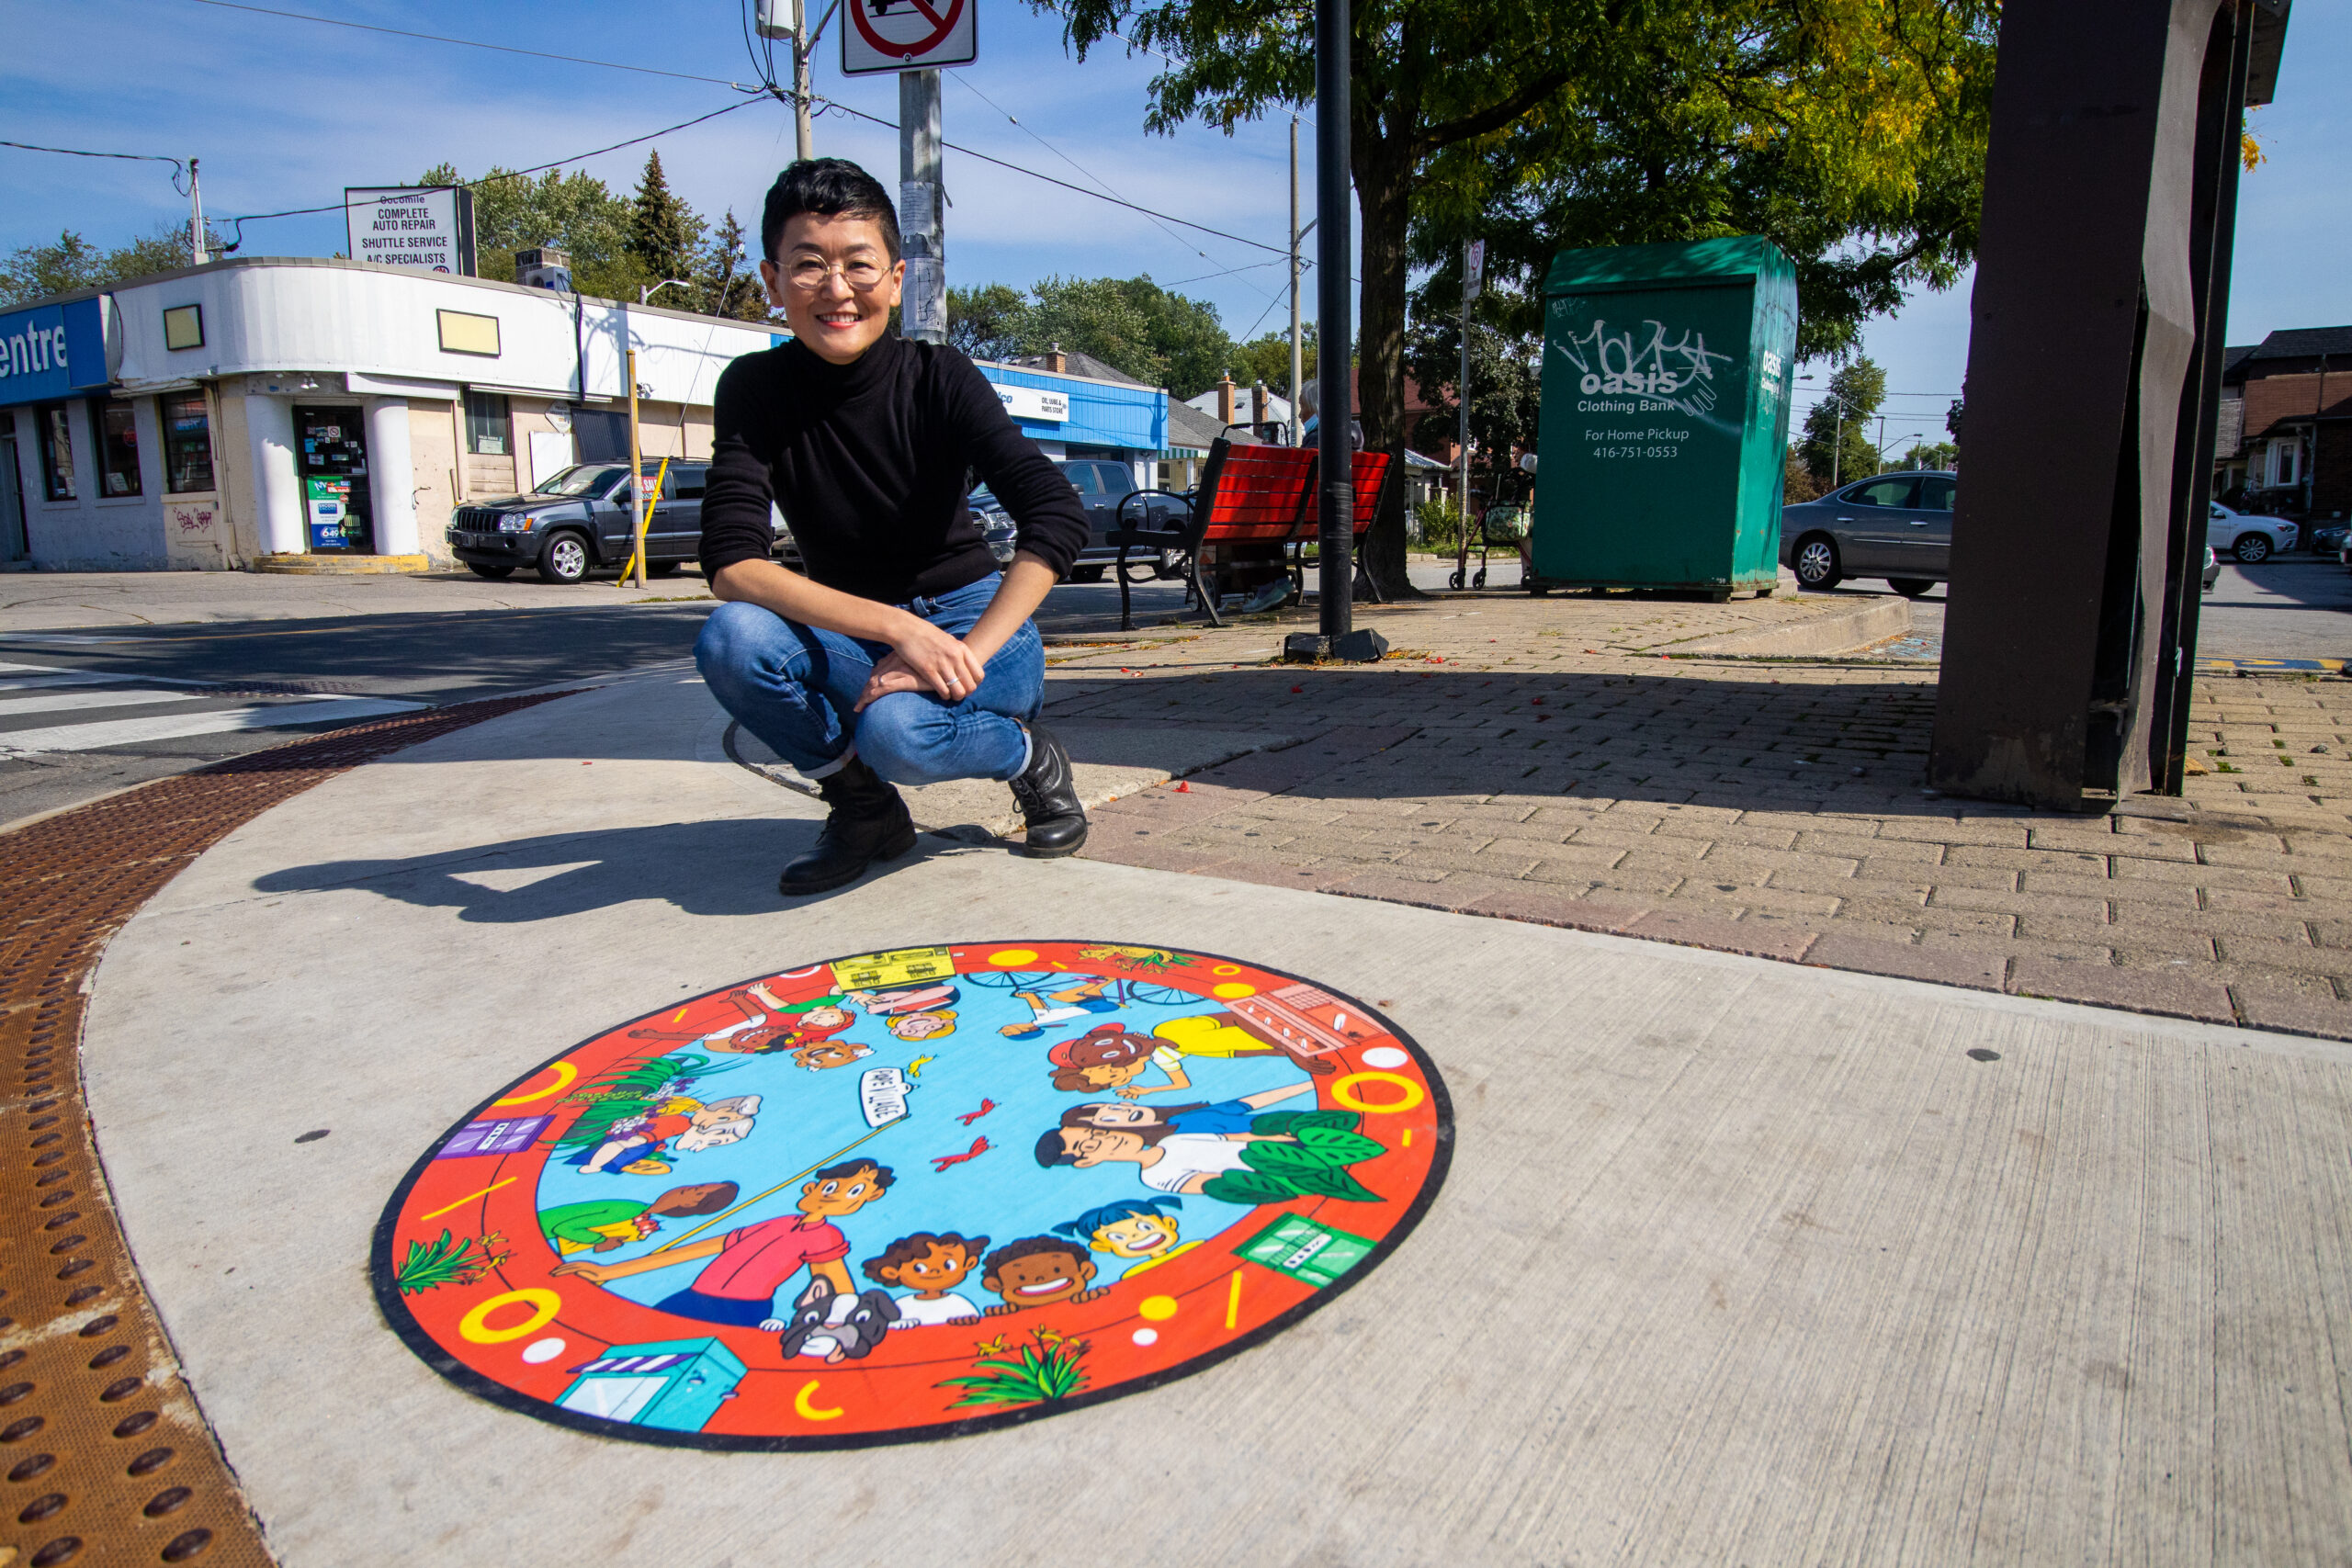 Suharu Ogawa poses with a sidewalk mural in Pape Village, Toronto